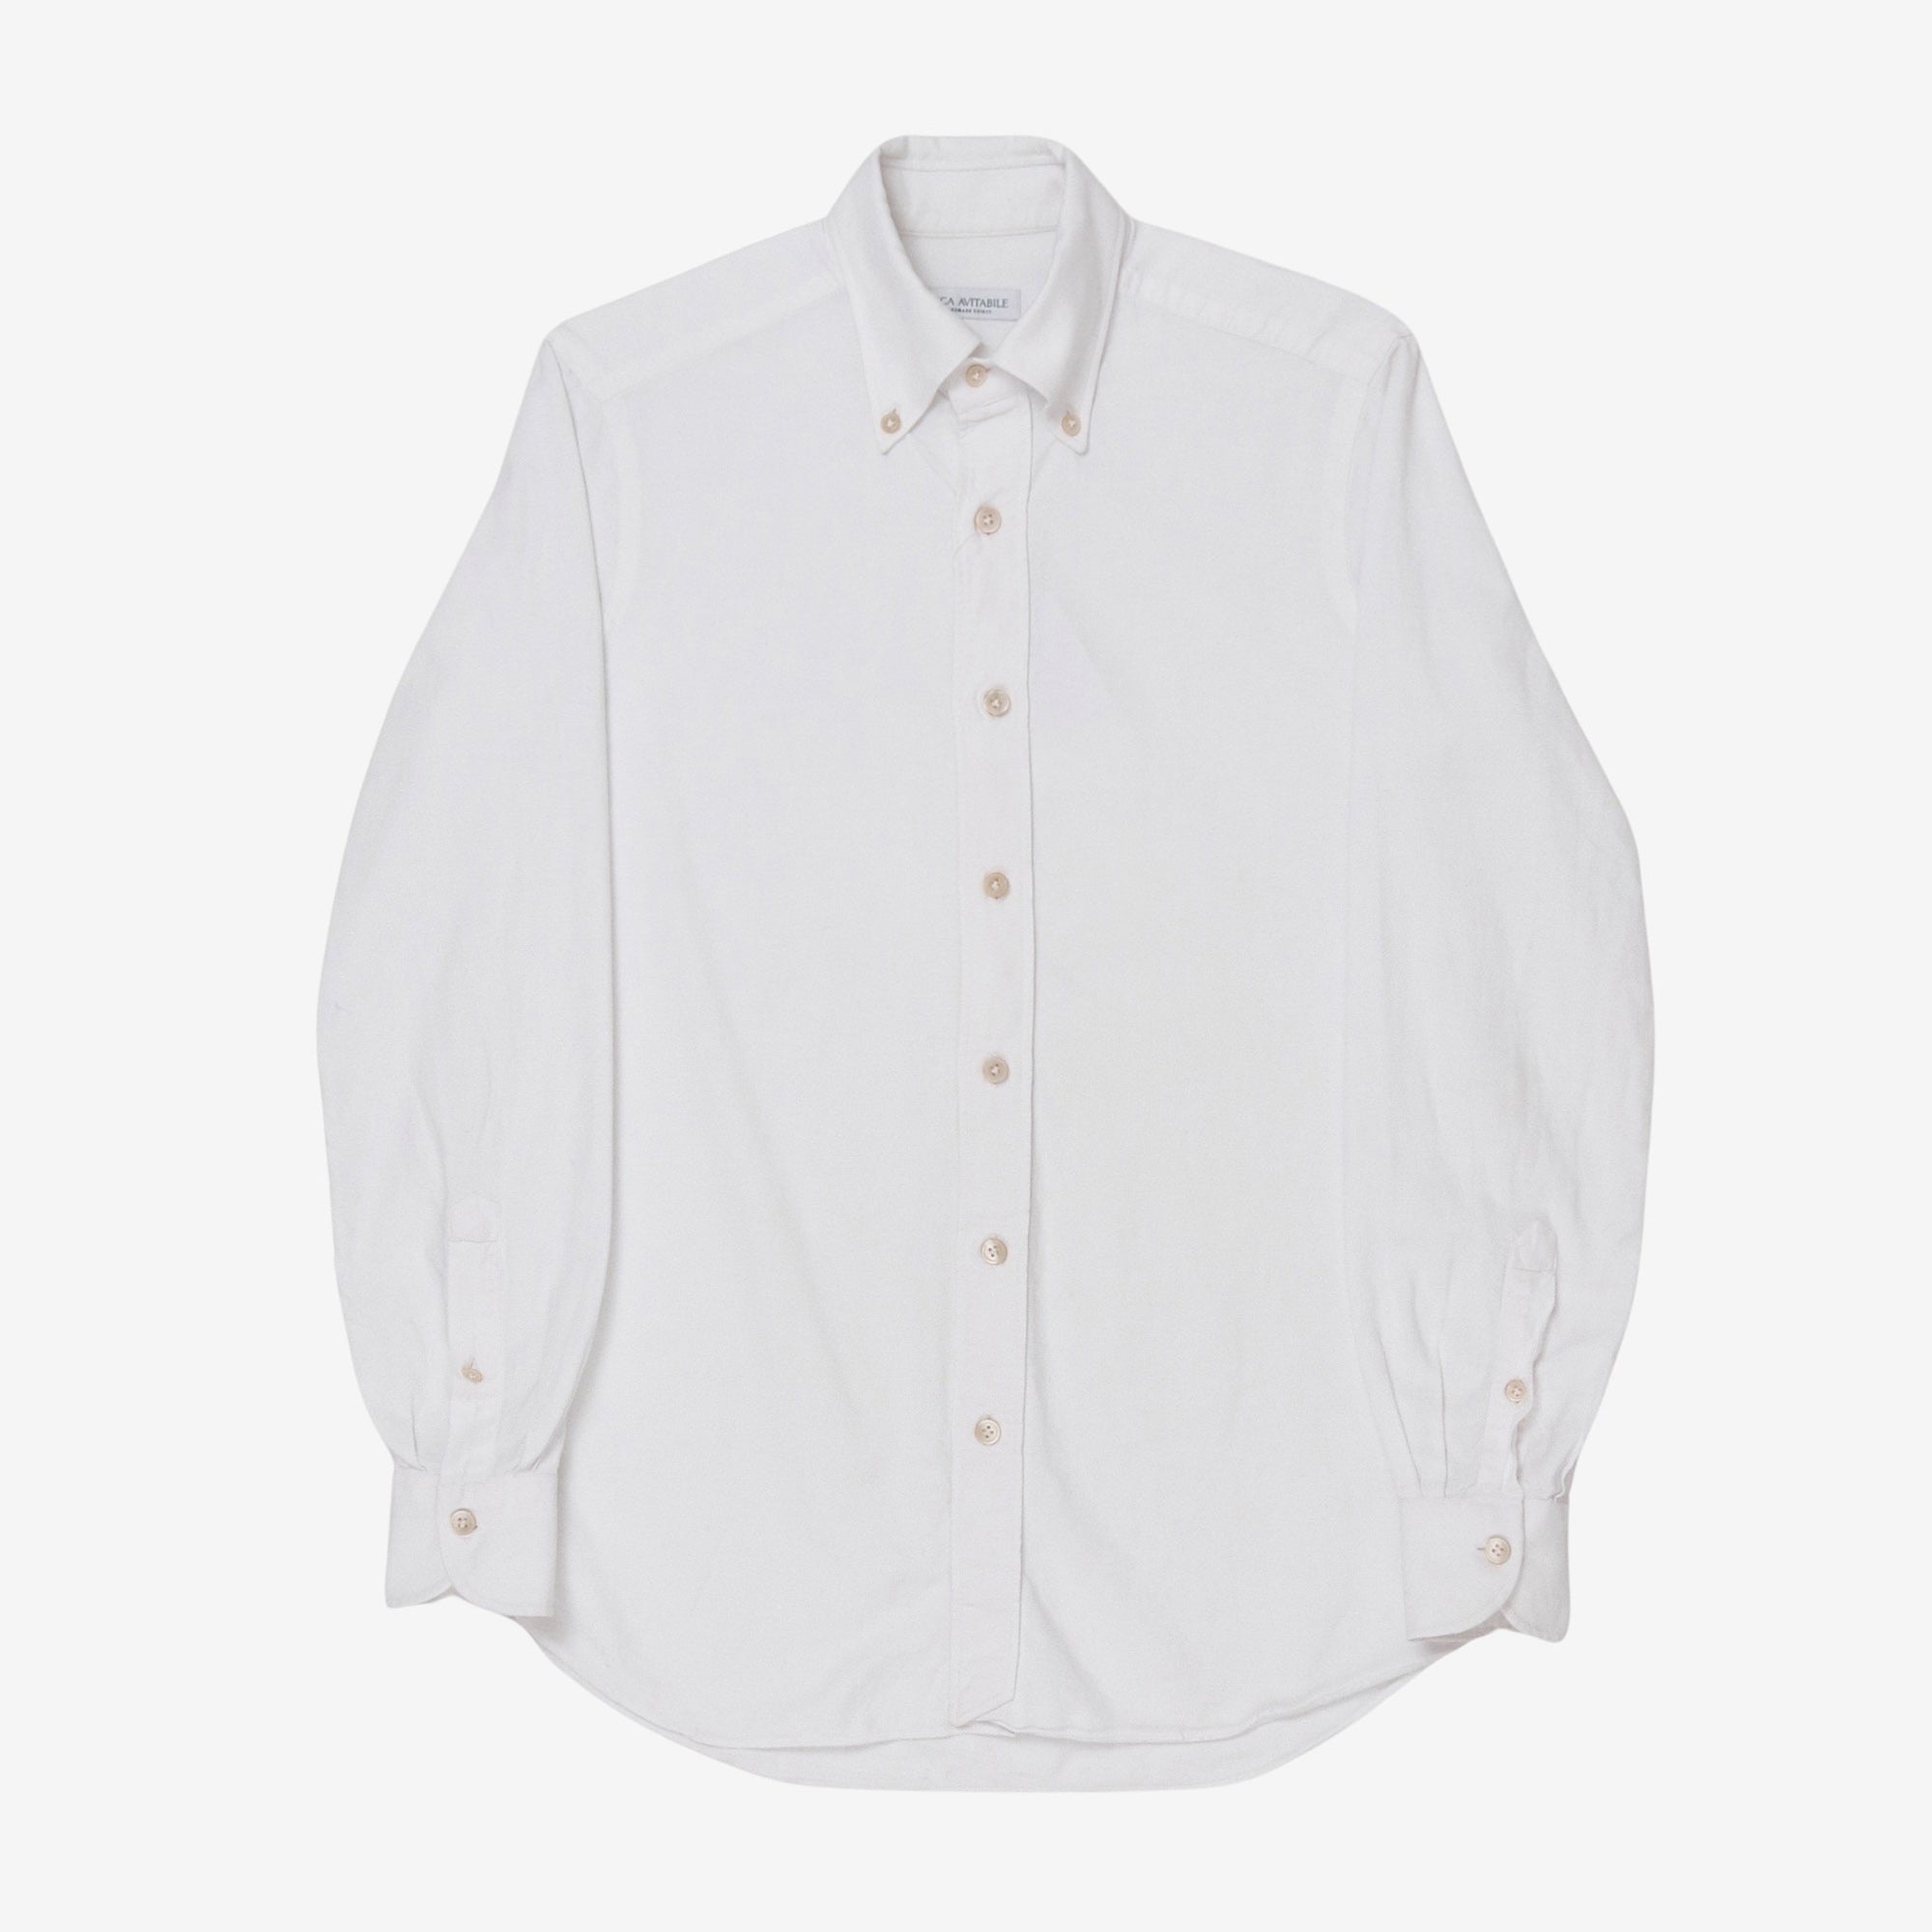 The PS Oxford Shirt